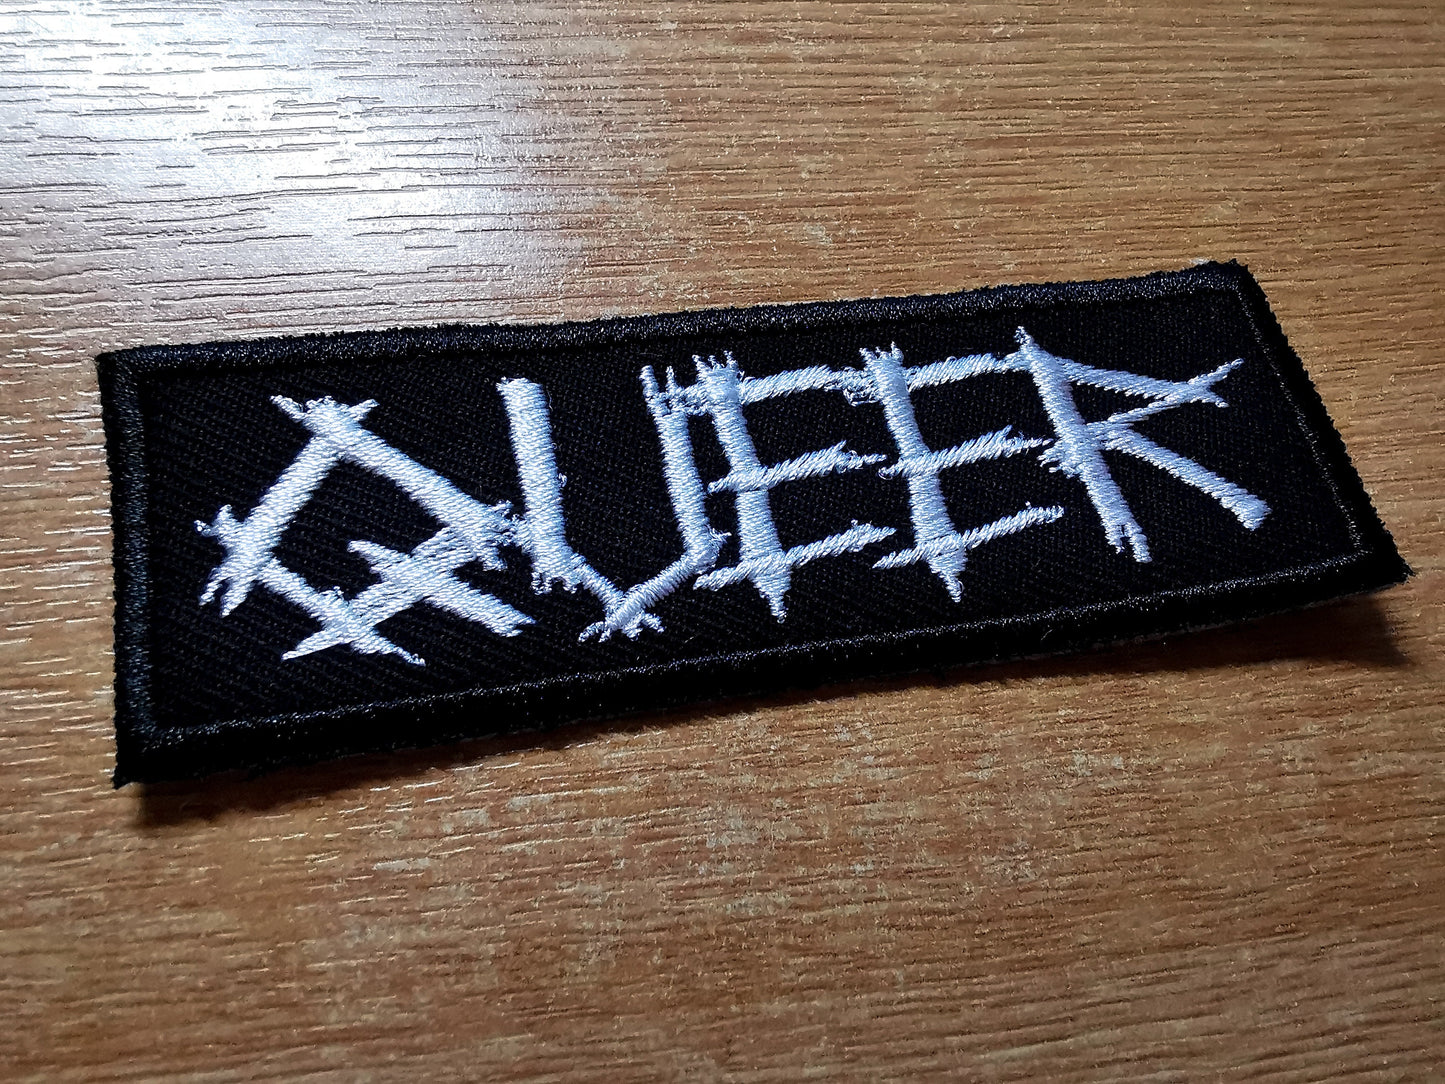 Queer Punk Metal Rainbow LGBTQ+ Iron On Patch Pride Embroidered Patches